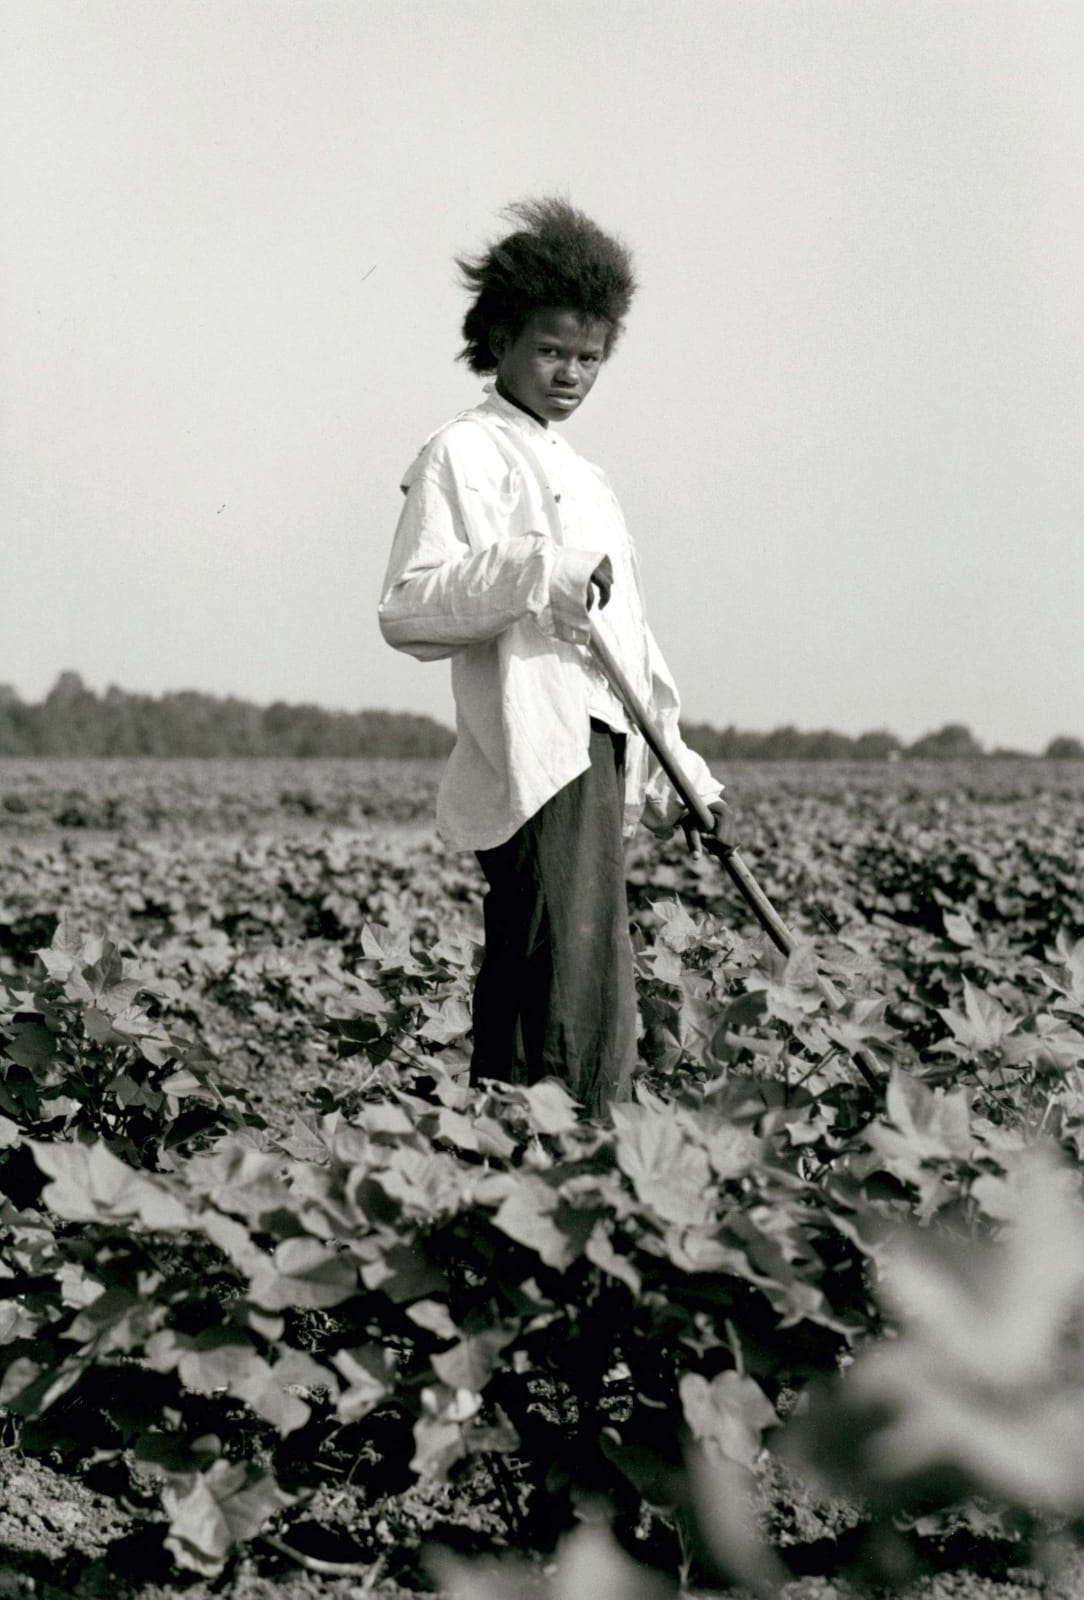 Danny Lyon, Chopping Cotton, Tallahatchie County, Mississippi Delta, 1963